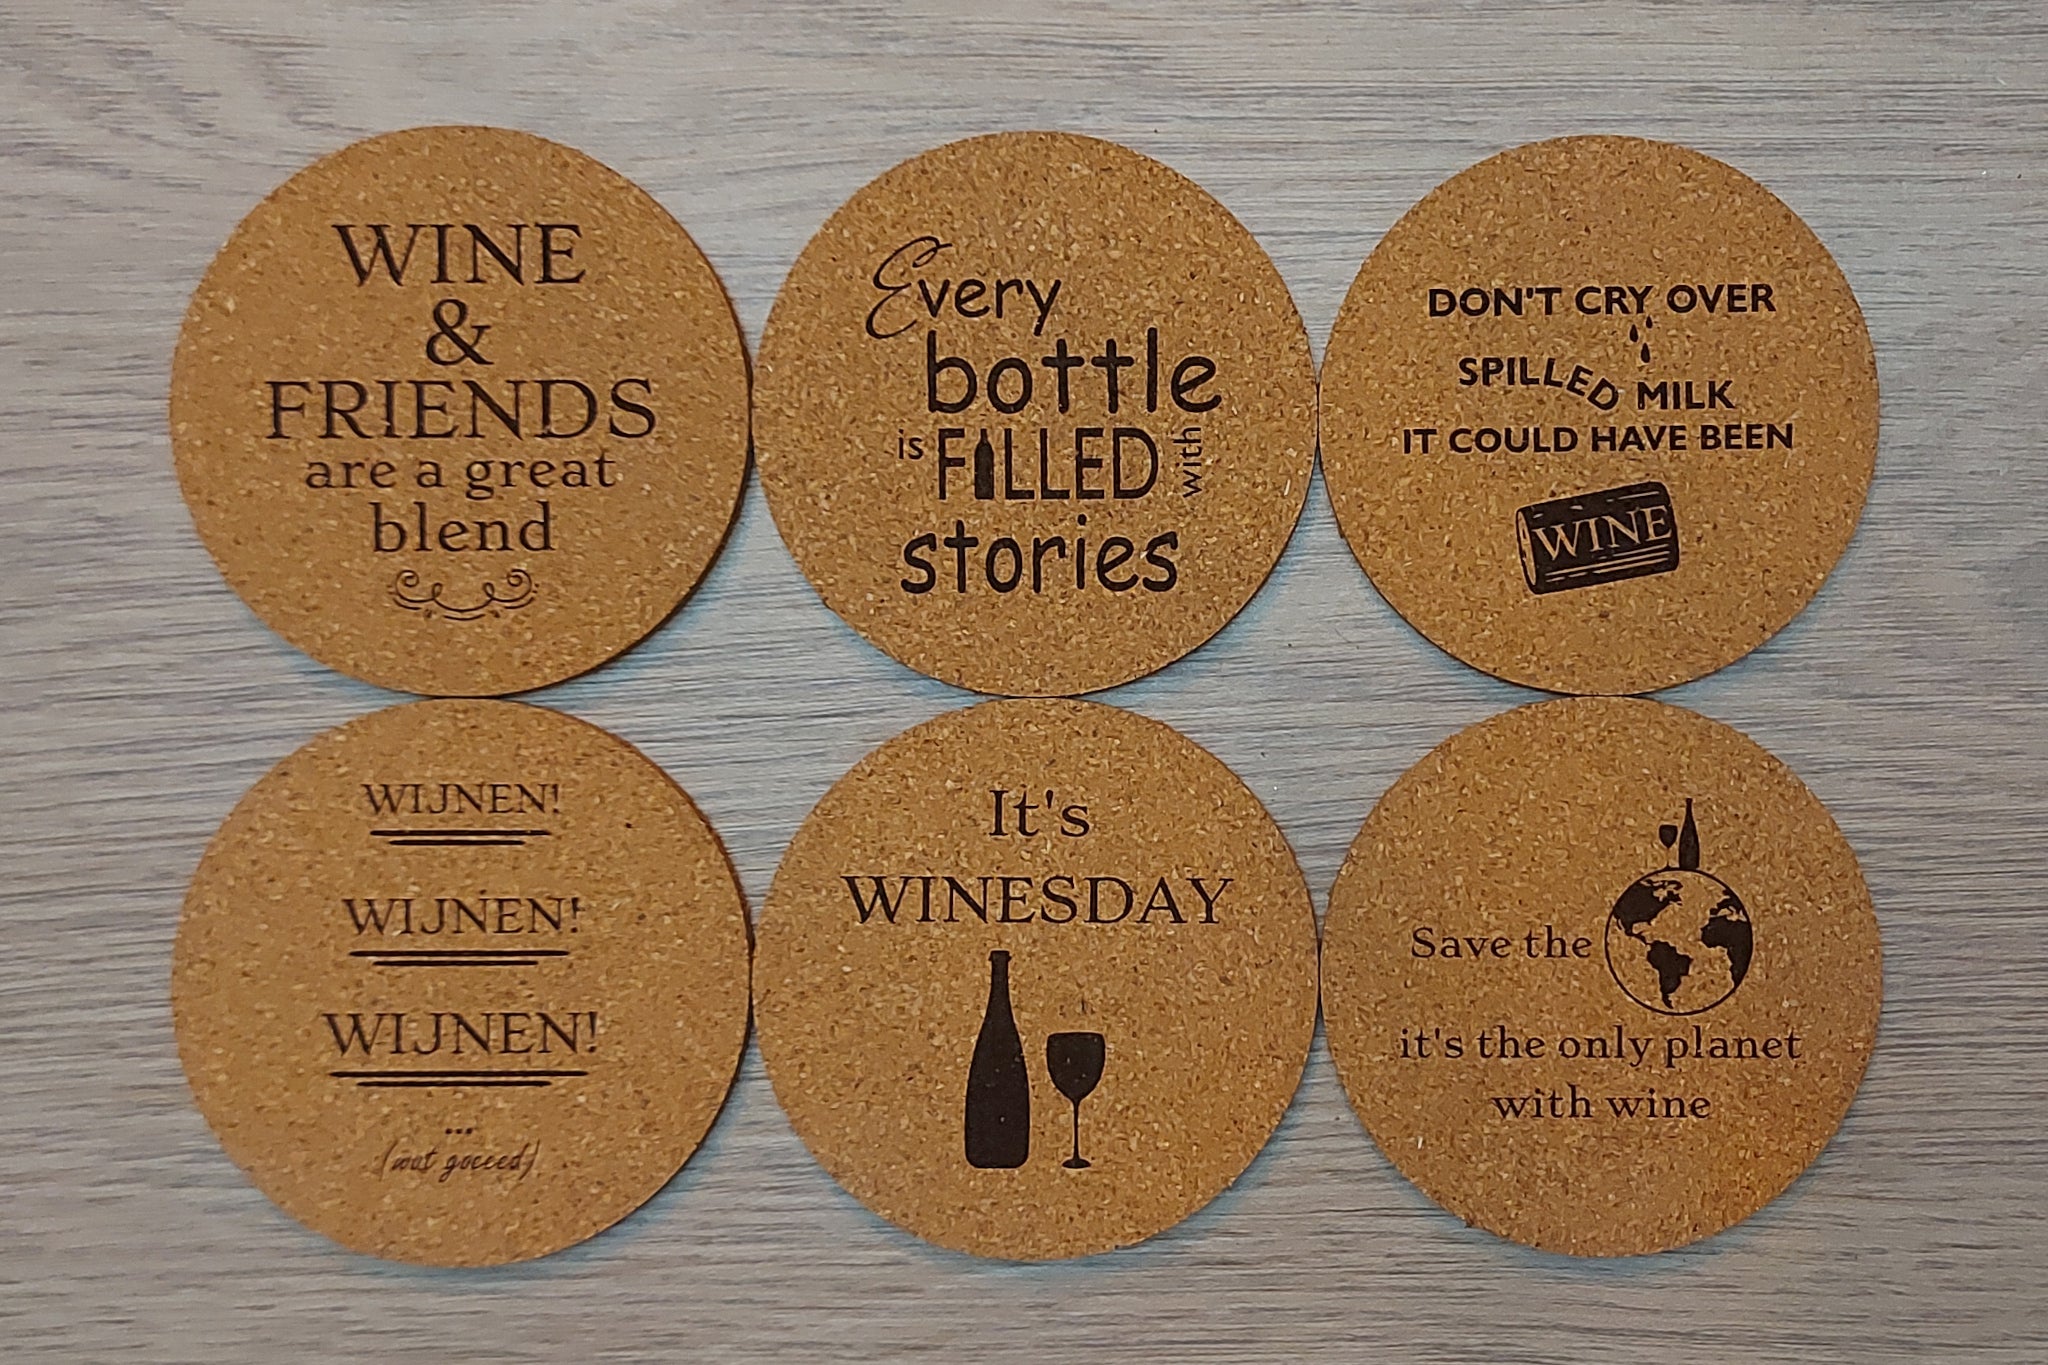 Kurken onderleggers met leuke quotes. Gravure van onderzetters met quotes 'Wine & Friends are a great blend', 'Every bottle is filles with stories', 'Don't cry over spilled milk, it could have been wine', 'Wijnen, wijnen, wijnen', 'It's Winesday', 'Save the planet, it's the only planet with wine'